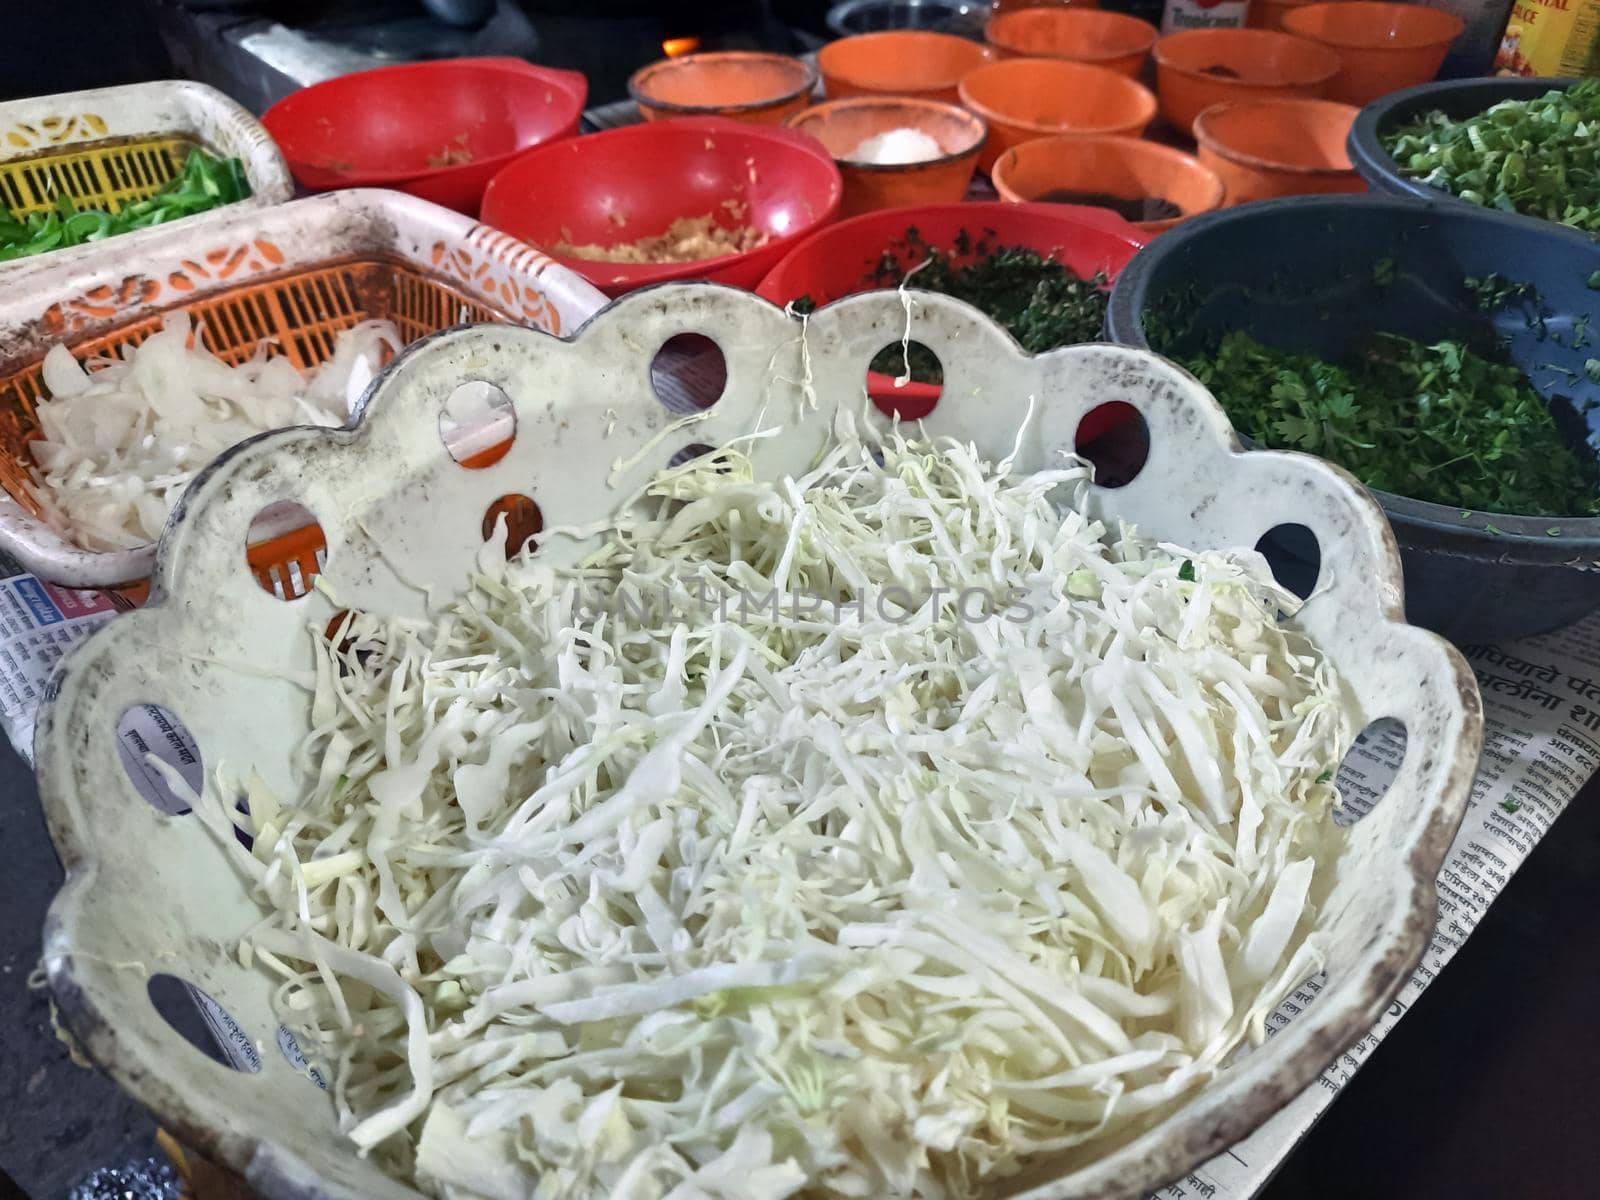 Top view closeup of tomato sauce, lettuce, rice, onions and other appetizers cut in silver bowls by tabishere